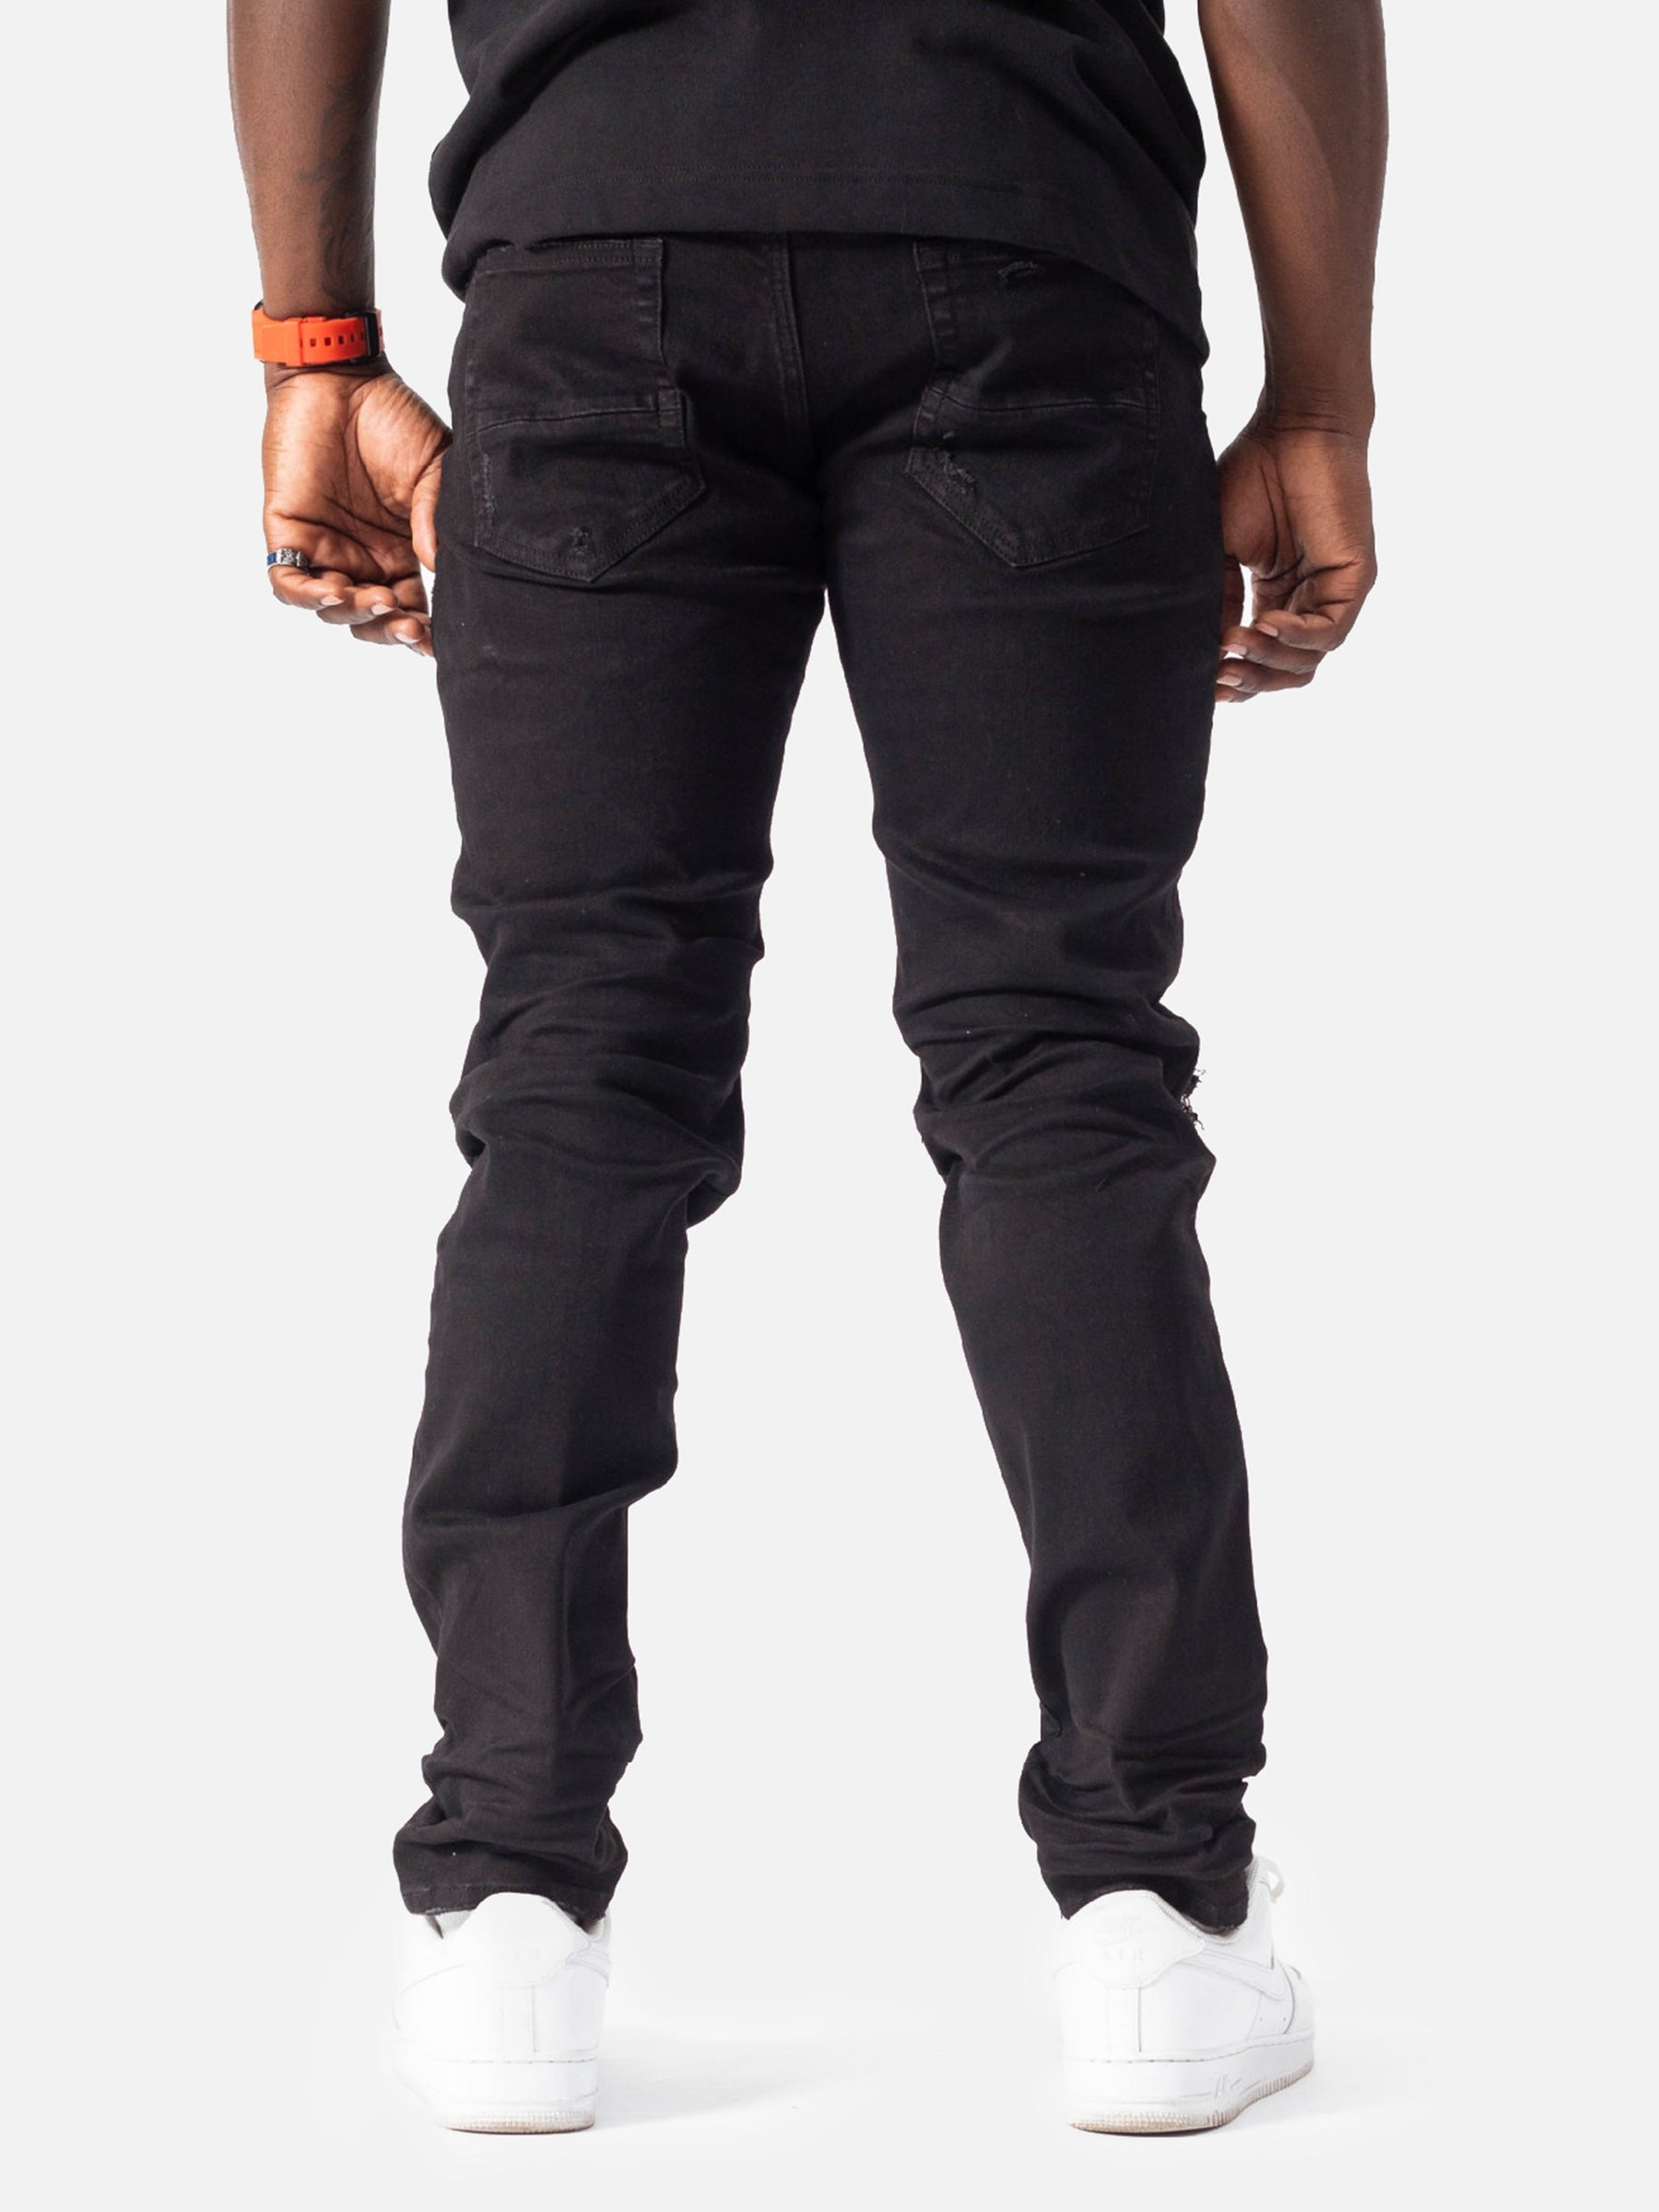 LUXENFY™ - Shredded Panel Leather Jeans luxenfy.com